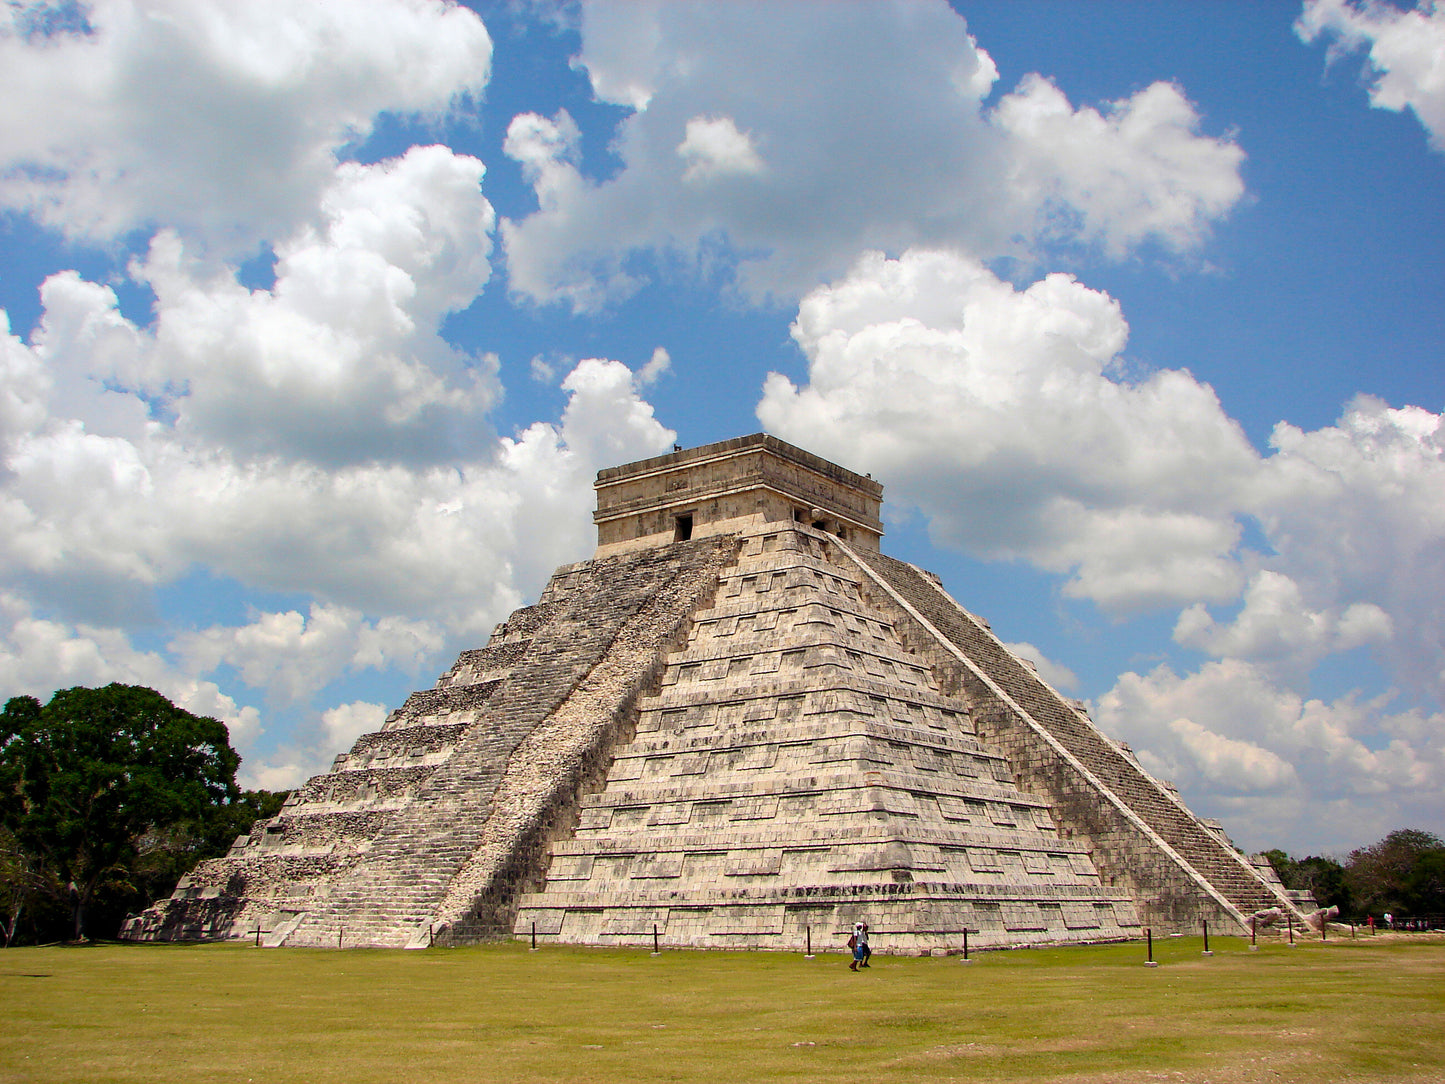 CHICHEN ITZA GLOSSY POSTER PICTURE PHOTO PRINT BANNER mayan mexican pyramid